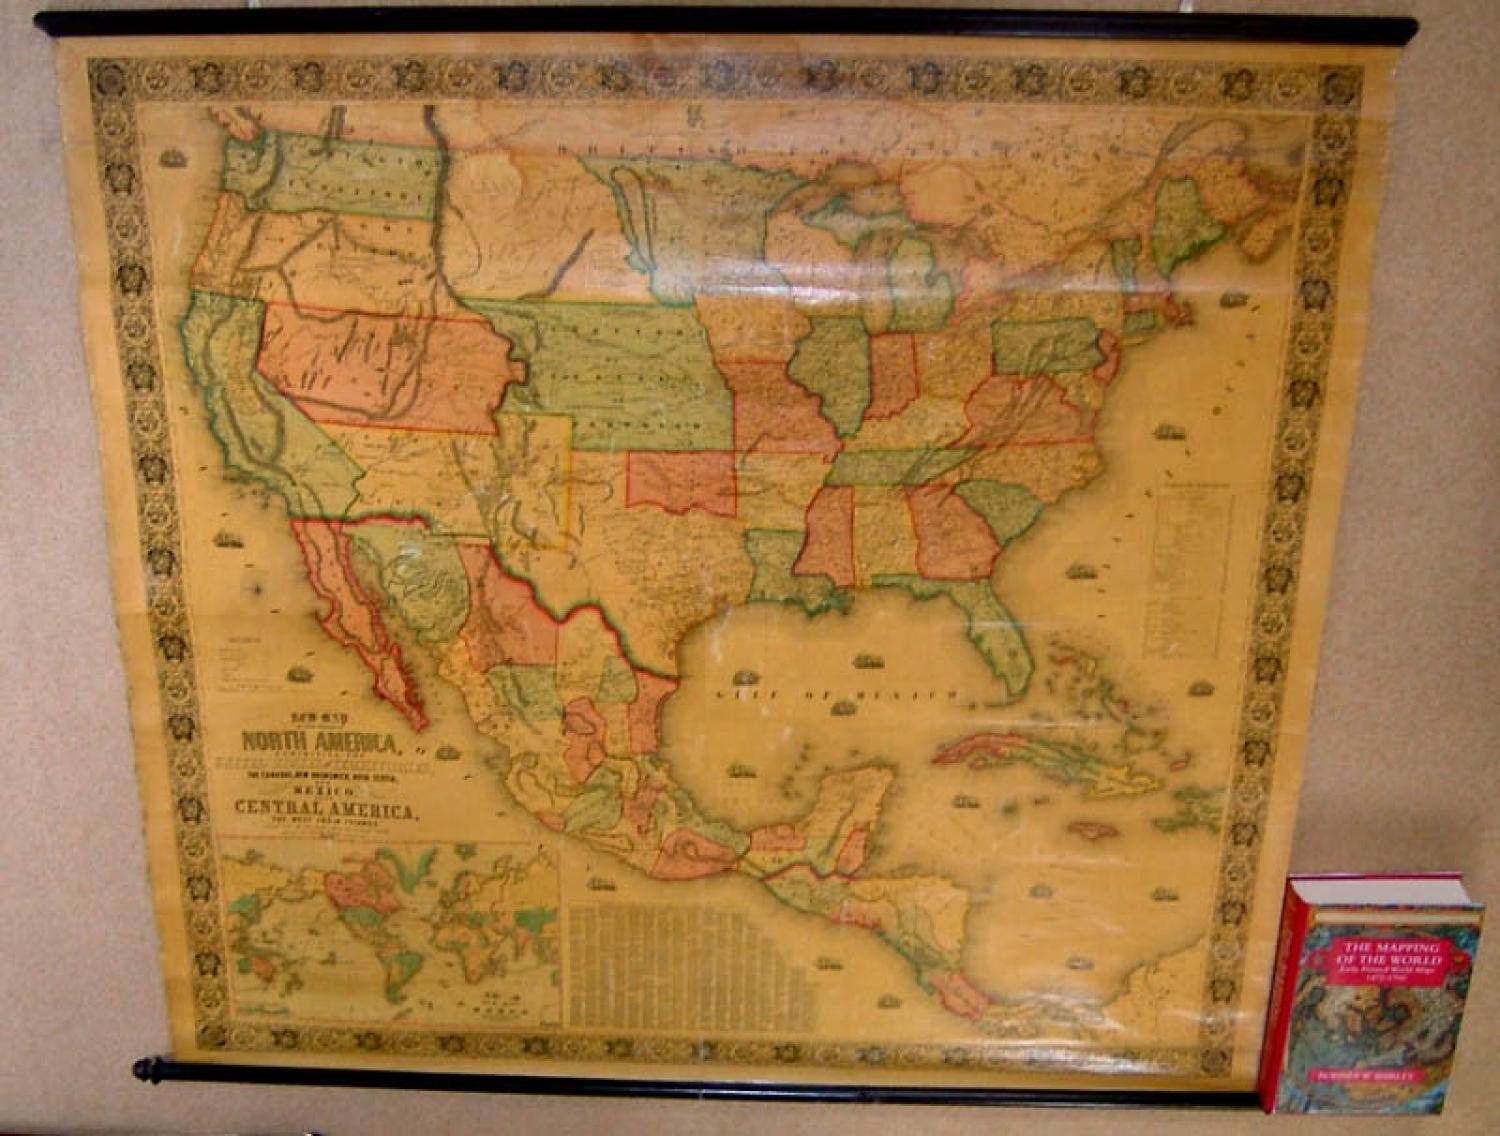 SOLD New Map of that Portion of North America Exhibiting the United States and Territories, the Canadas..